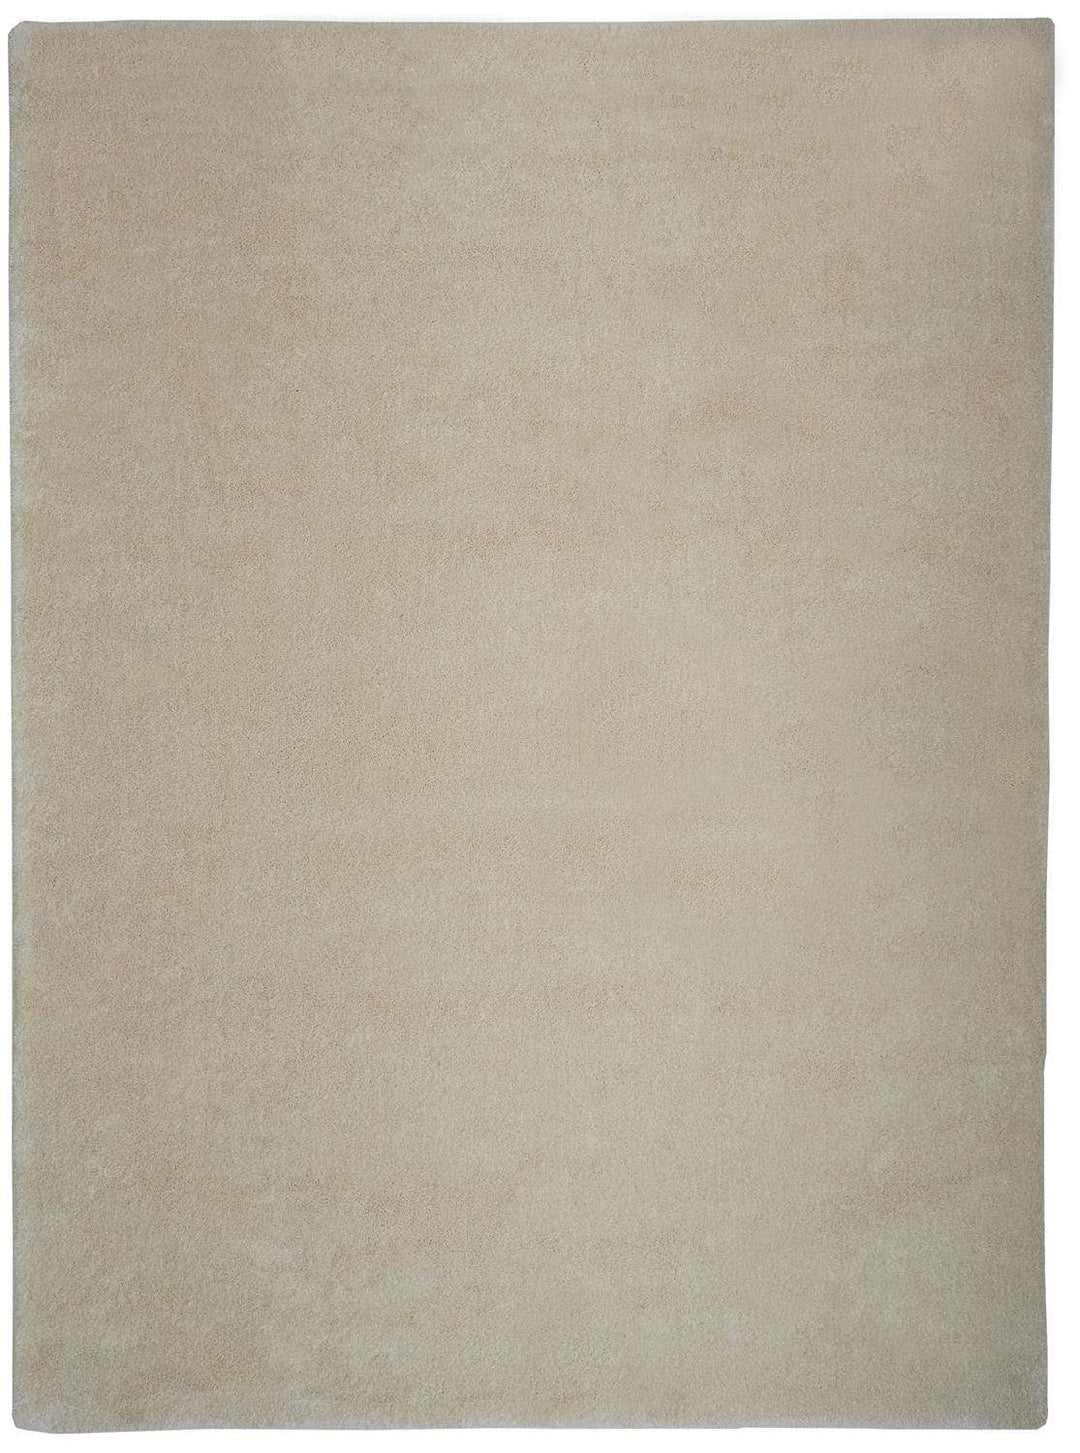 Feizy Feizy Marbury Luxury Tufted Shag Rug - Available in 6 Sizes - Cloud Cream 2' x 3'-4" 6574004FCRM000A25